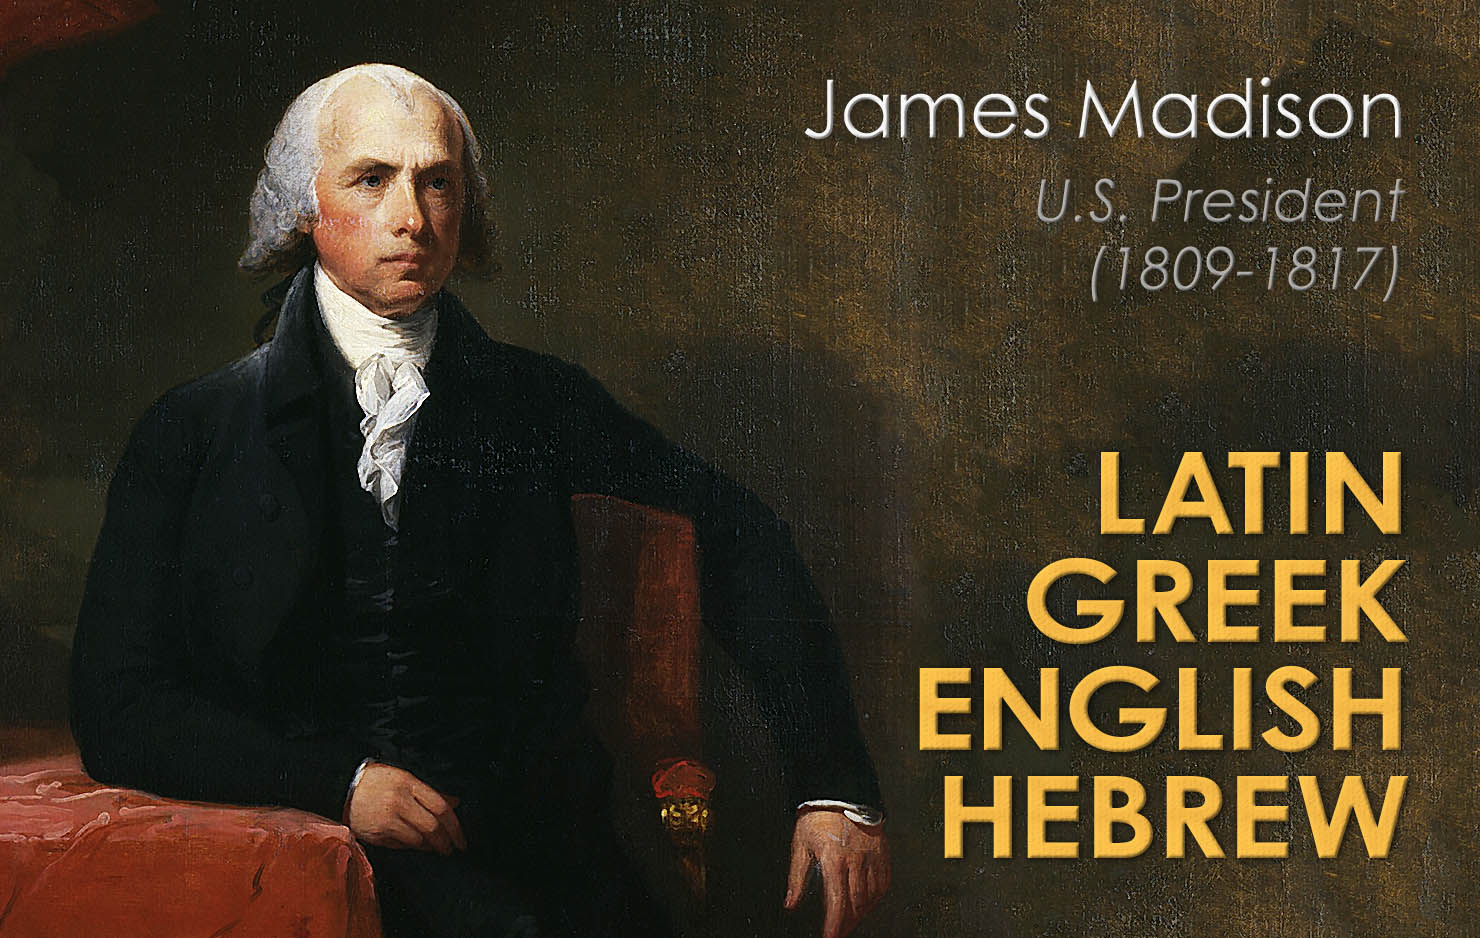 'America’s fourth president studied Latin before he turned 13. He also mastered Greek and remained in college an additional year to study ethics and Hebrew.